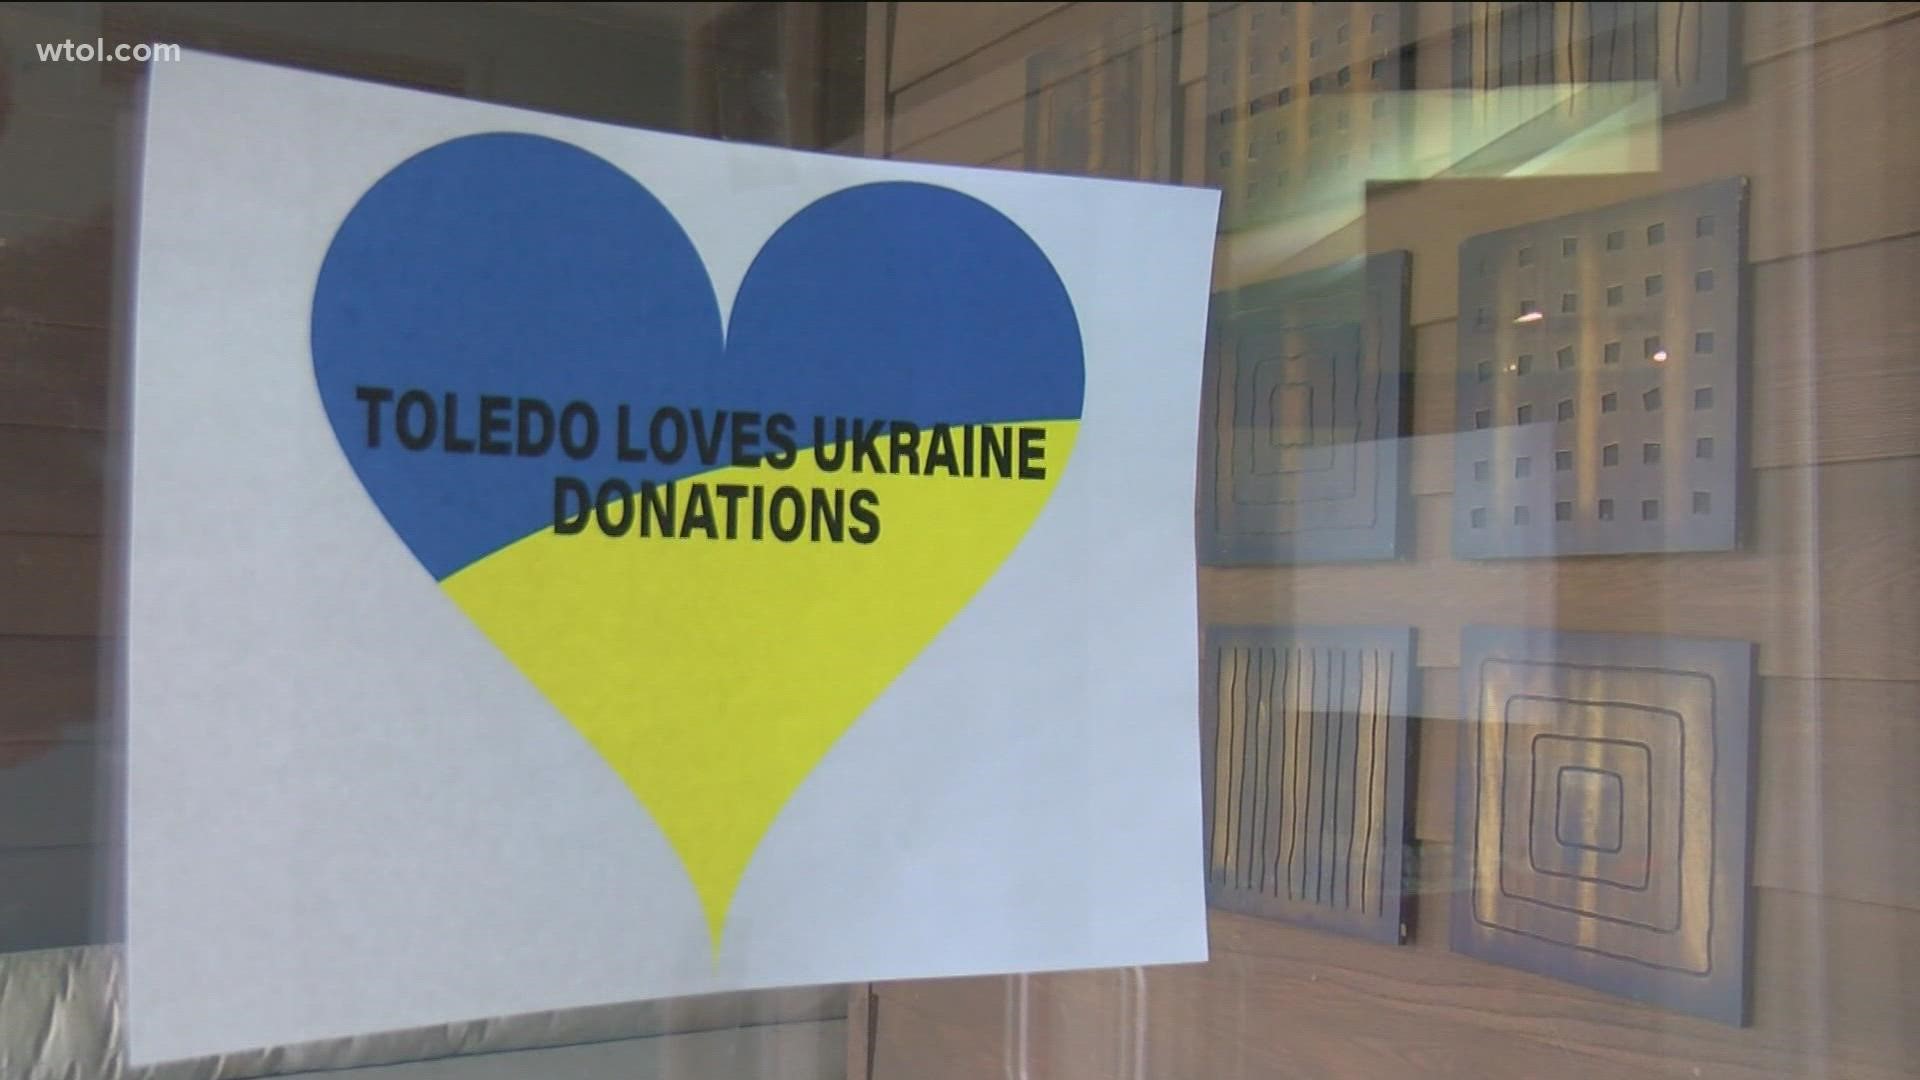 On the final day of items being dropped off, organizers say there was an overwhelming show of support for Ukrainians, in the form of donations.